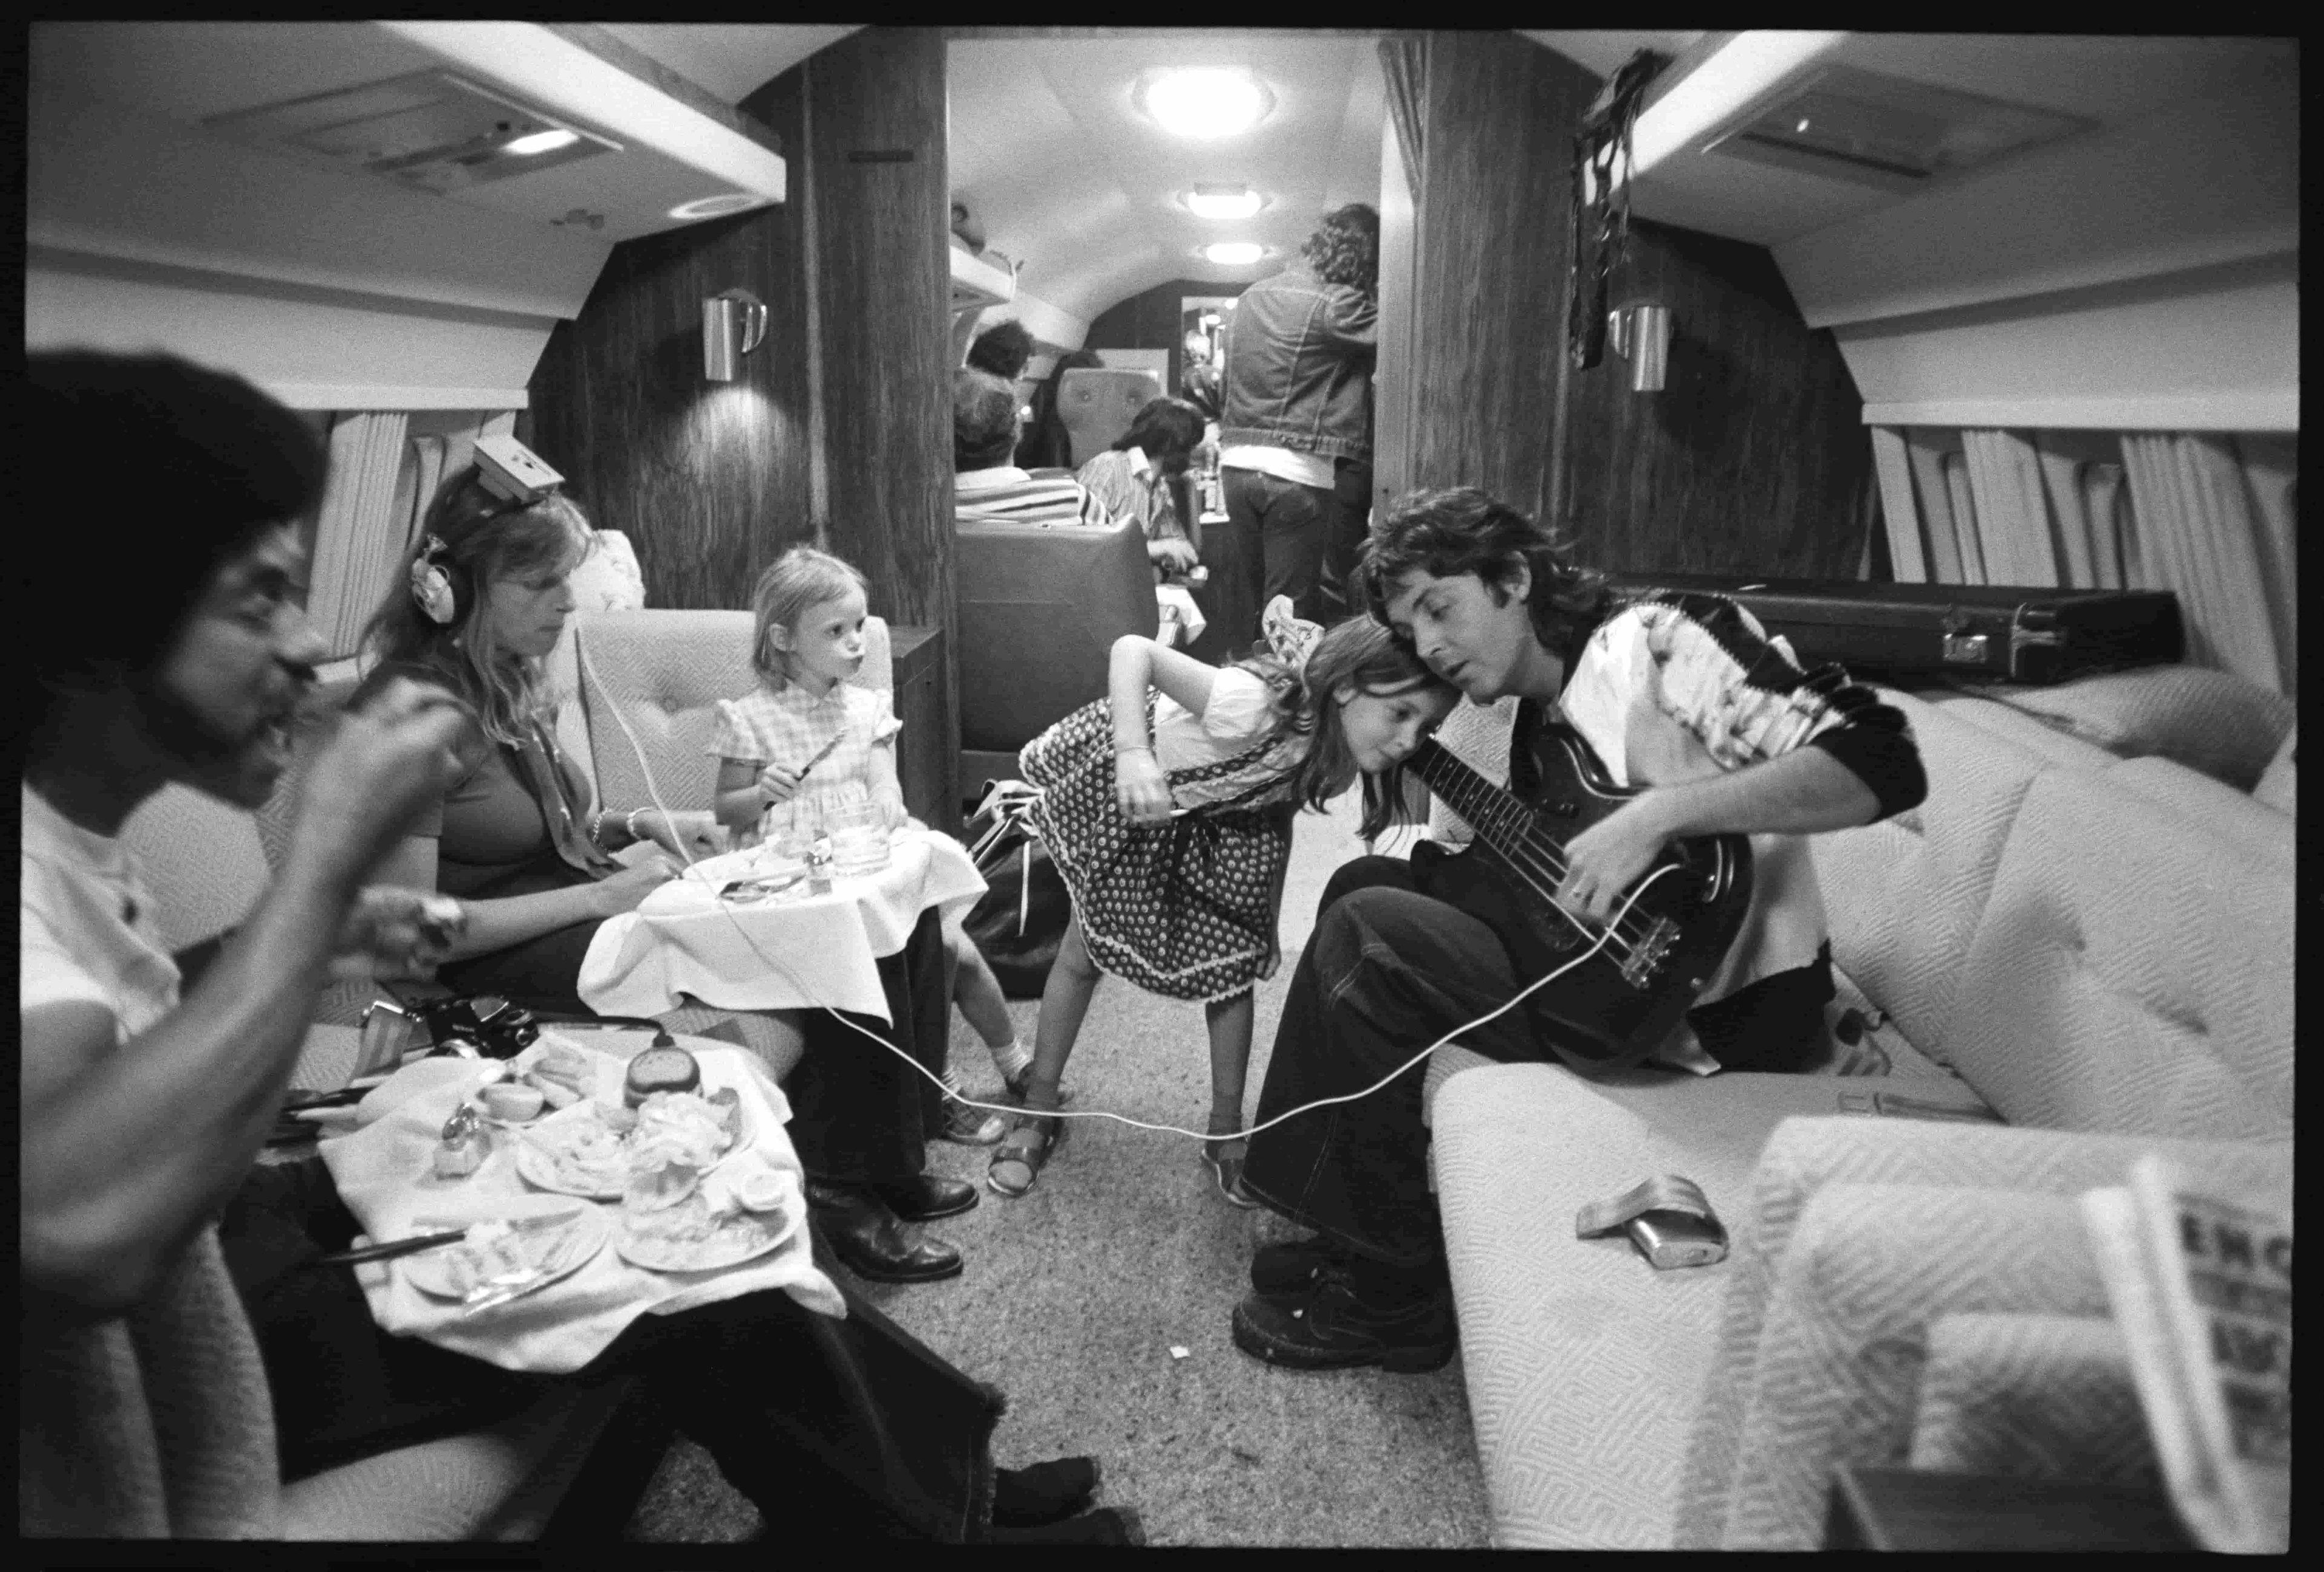 Wings band members and McCartney children play music on an airplane